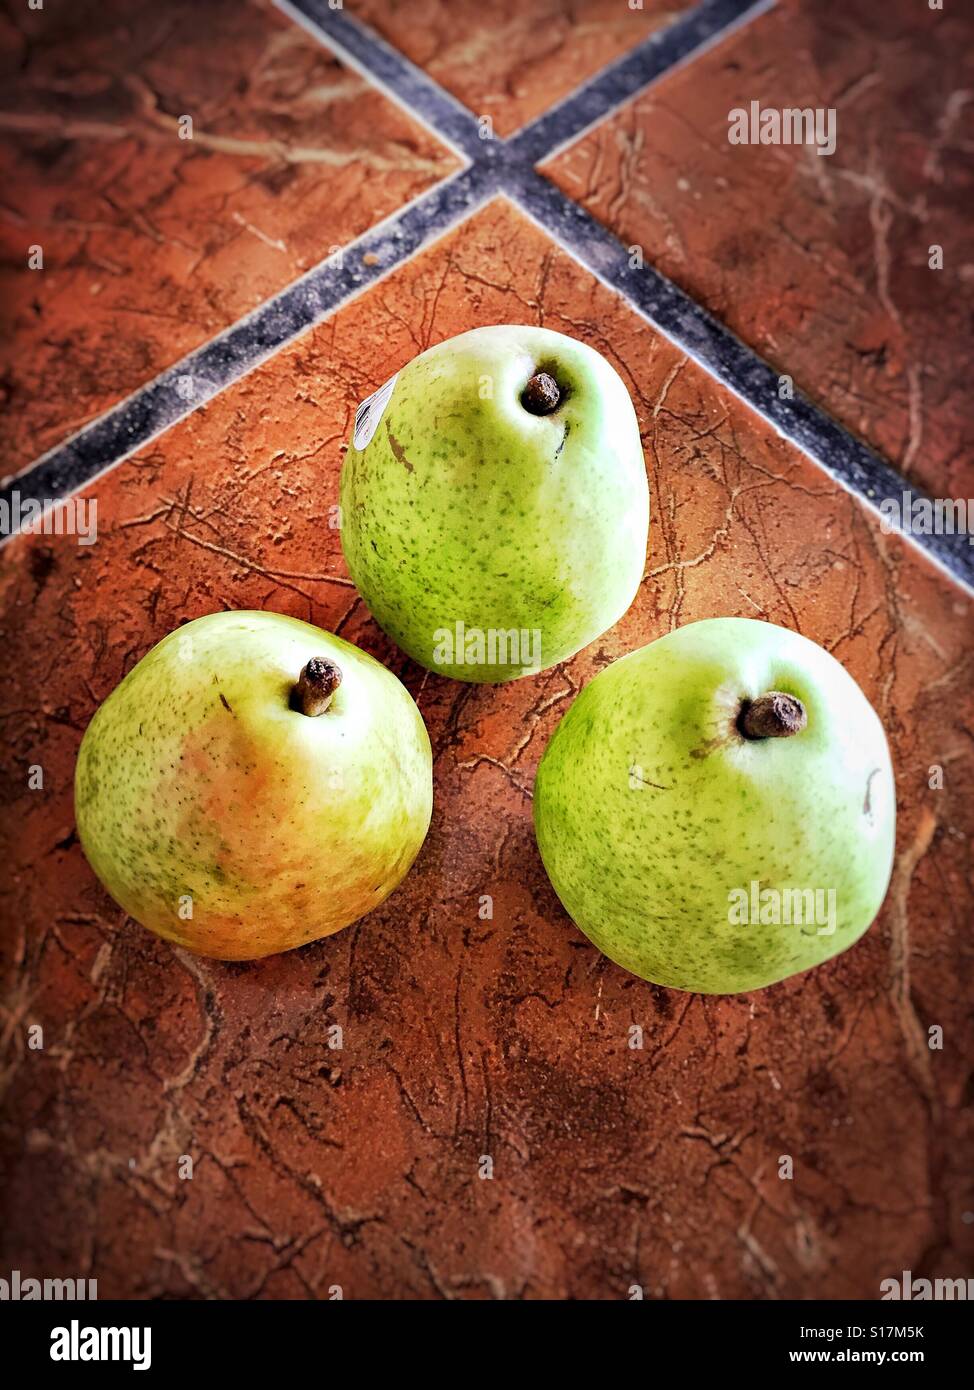 Three ripe pears are on a tile countertop. Stock Photo